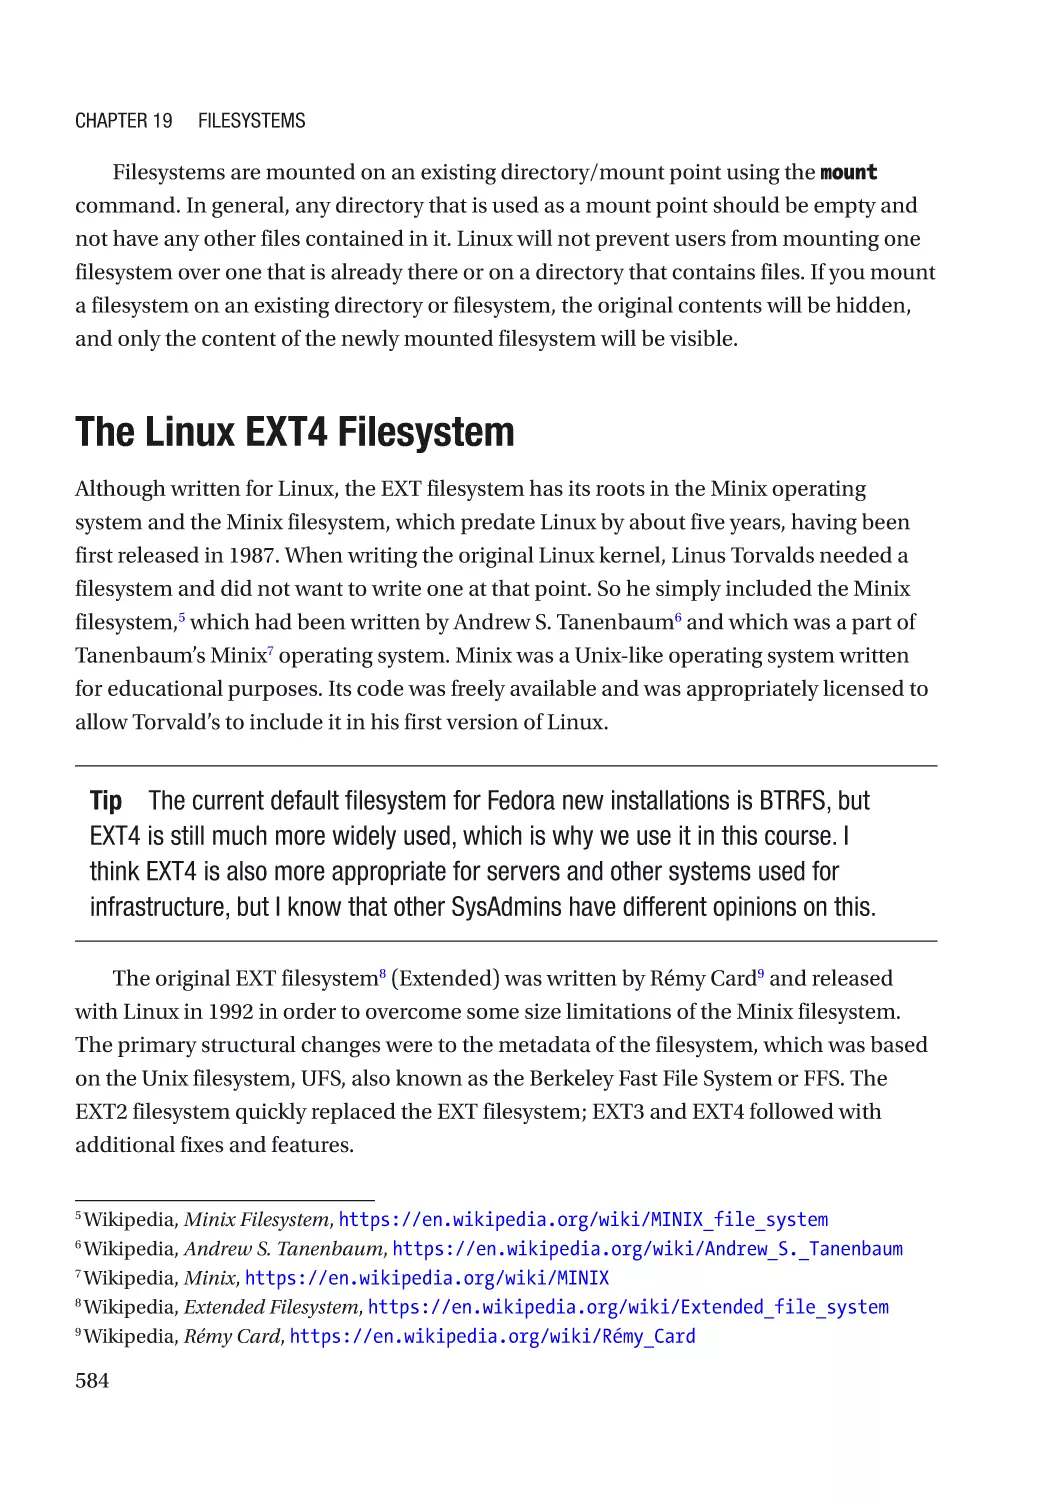 The Linux EXT4 Filesystem